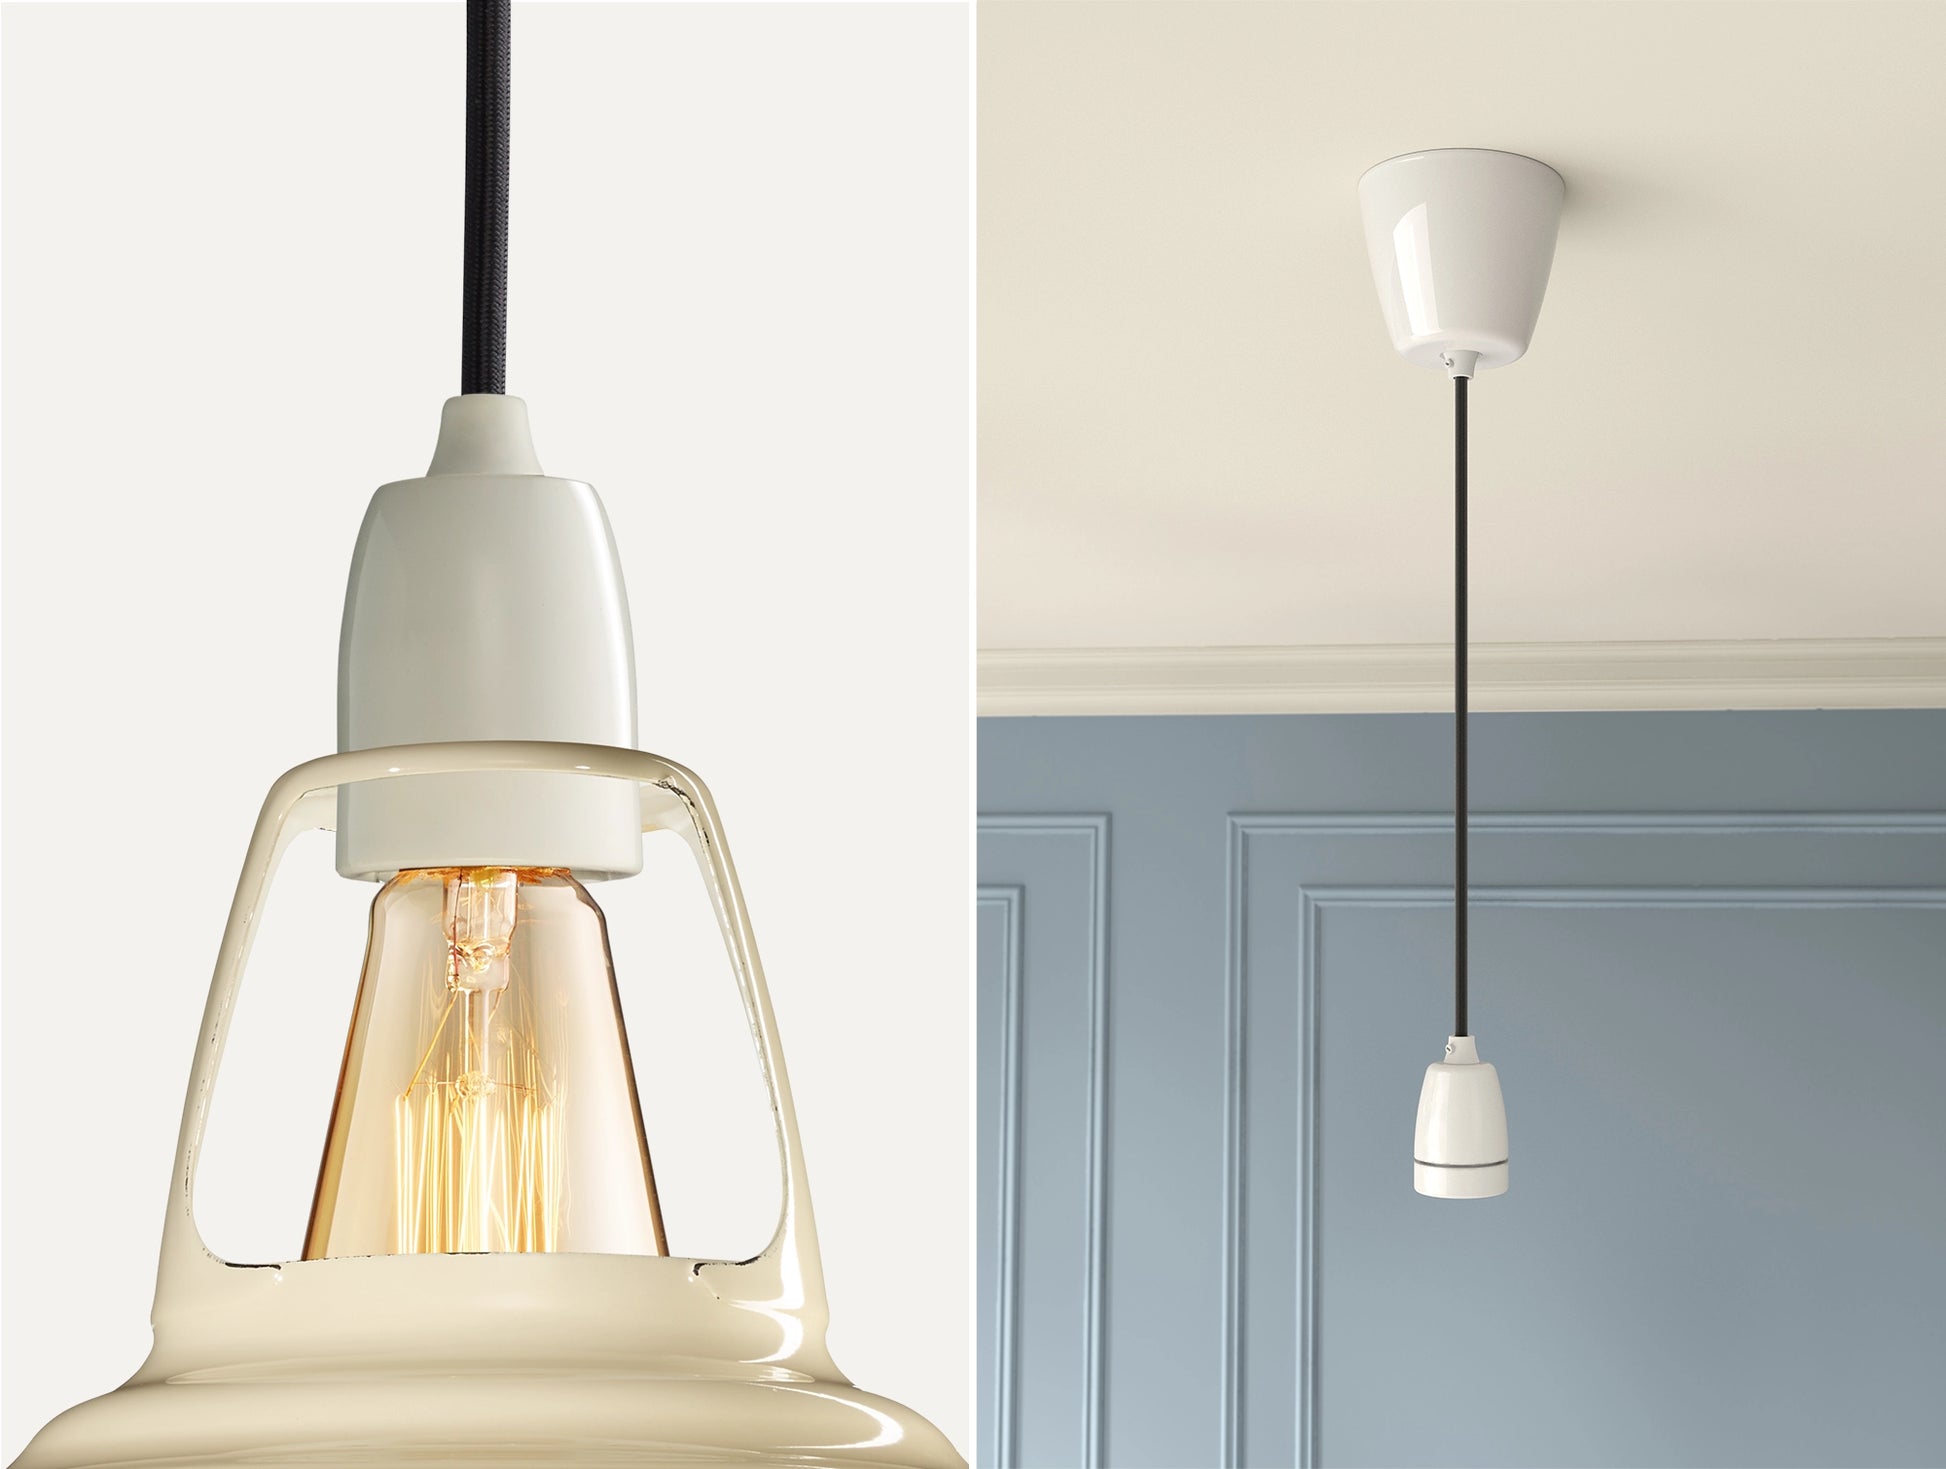 Close up of an E27 Porcelain suspension set on a Classic Cream lampshade on the left. On the right, an E27 Porcelain pendant set is hanging from the ceiling